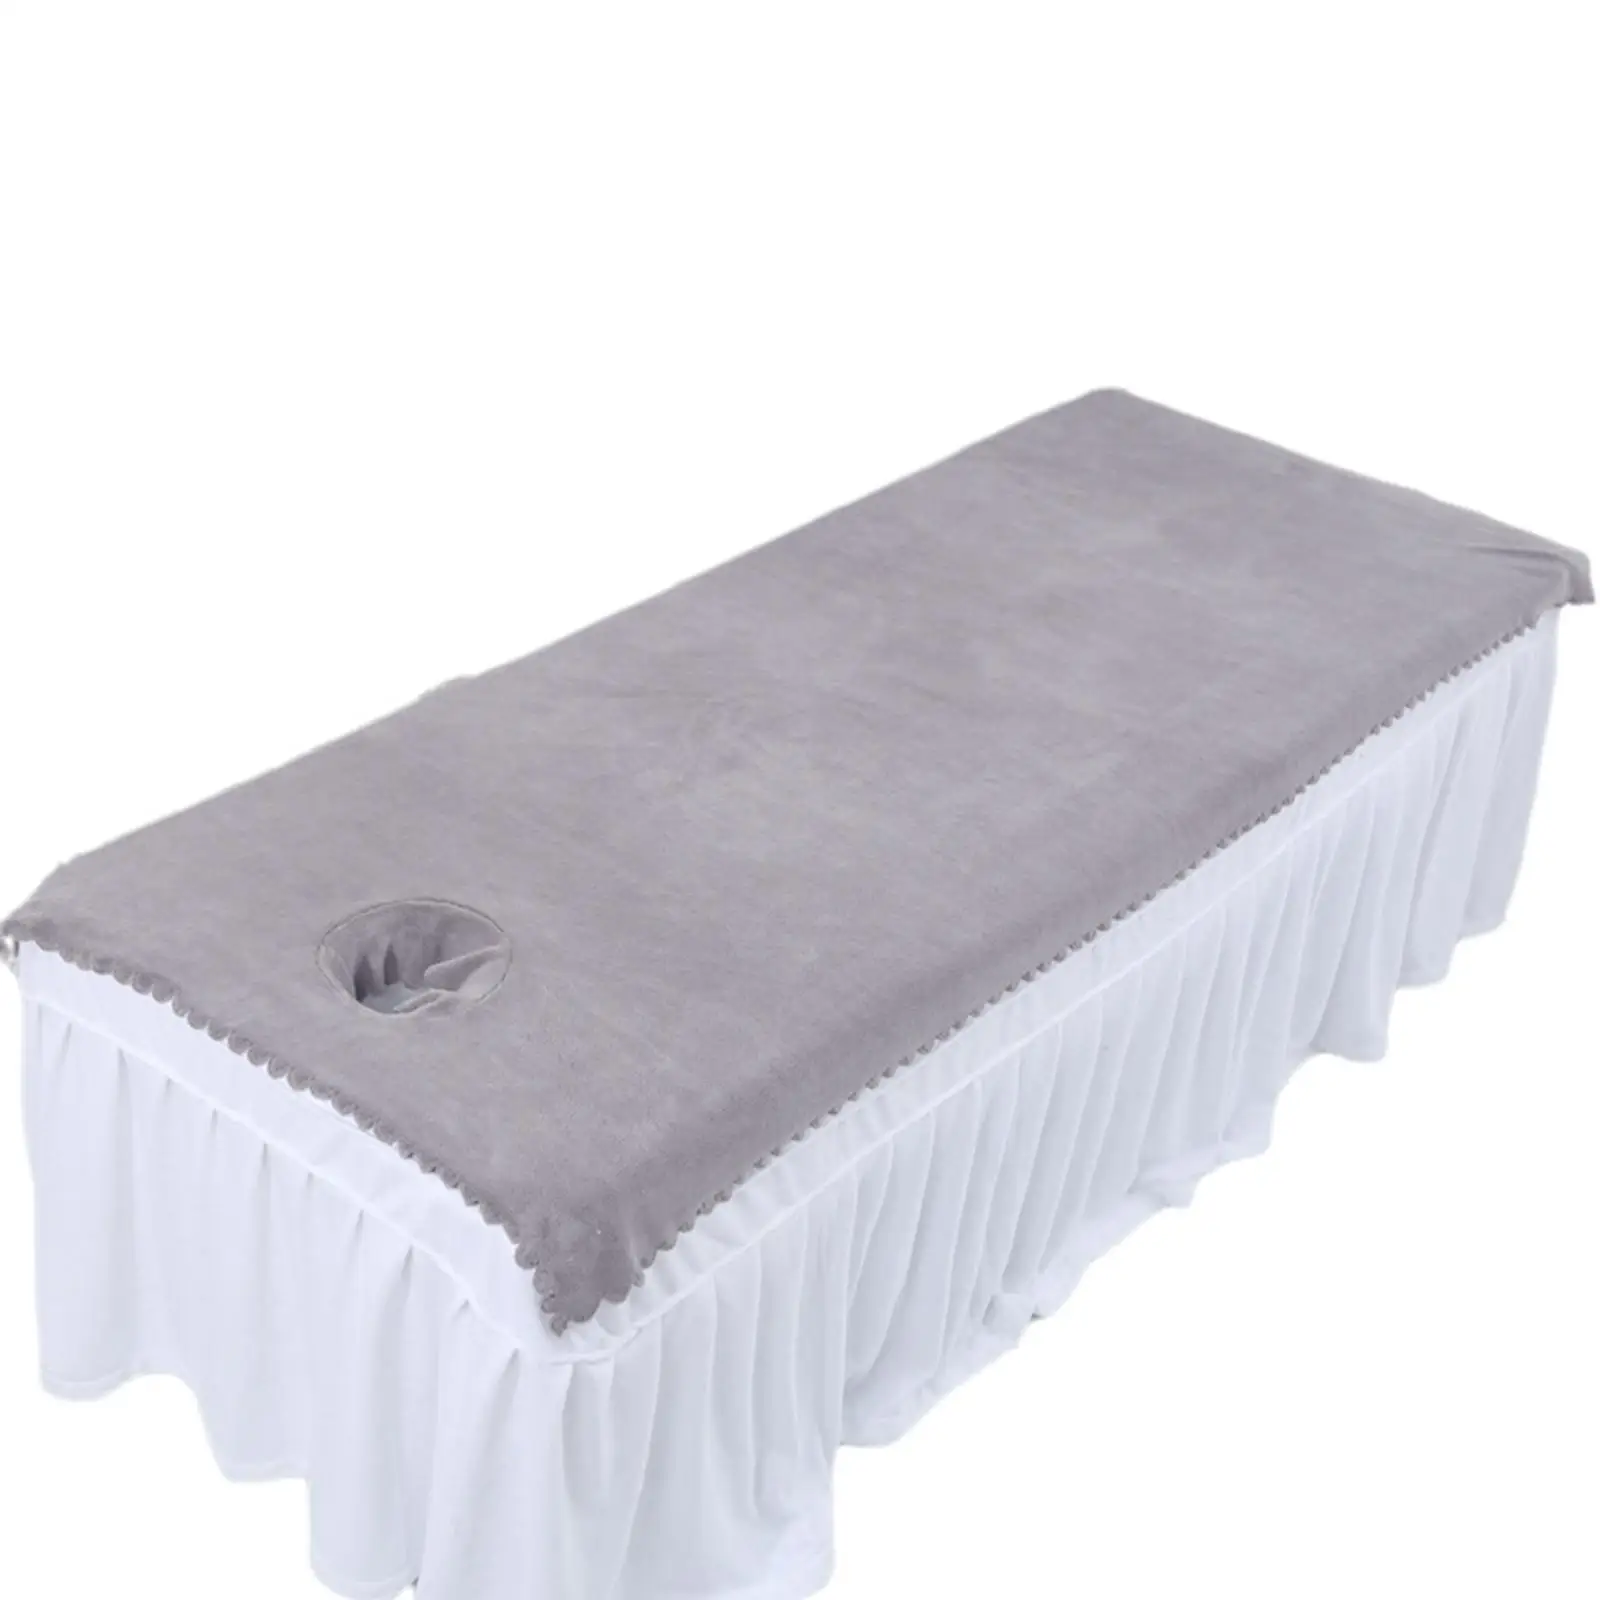 Massage Table Sheet Covers with Face Breath Hole Coverlet for Massage Bed